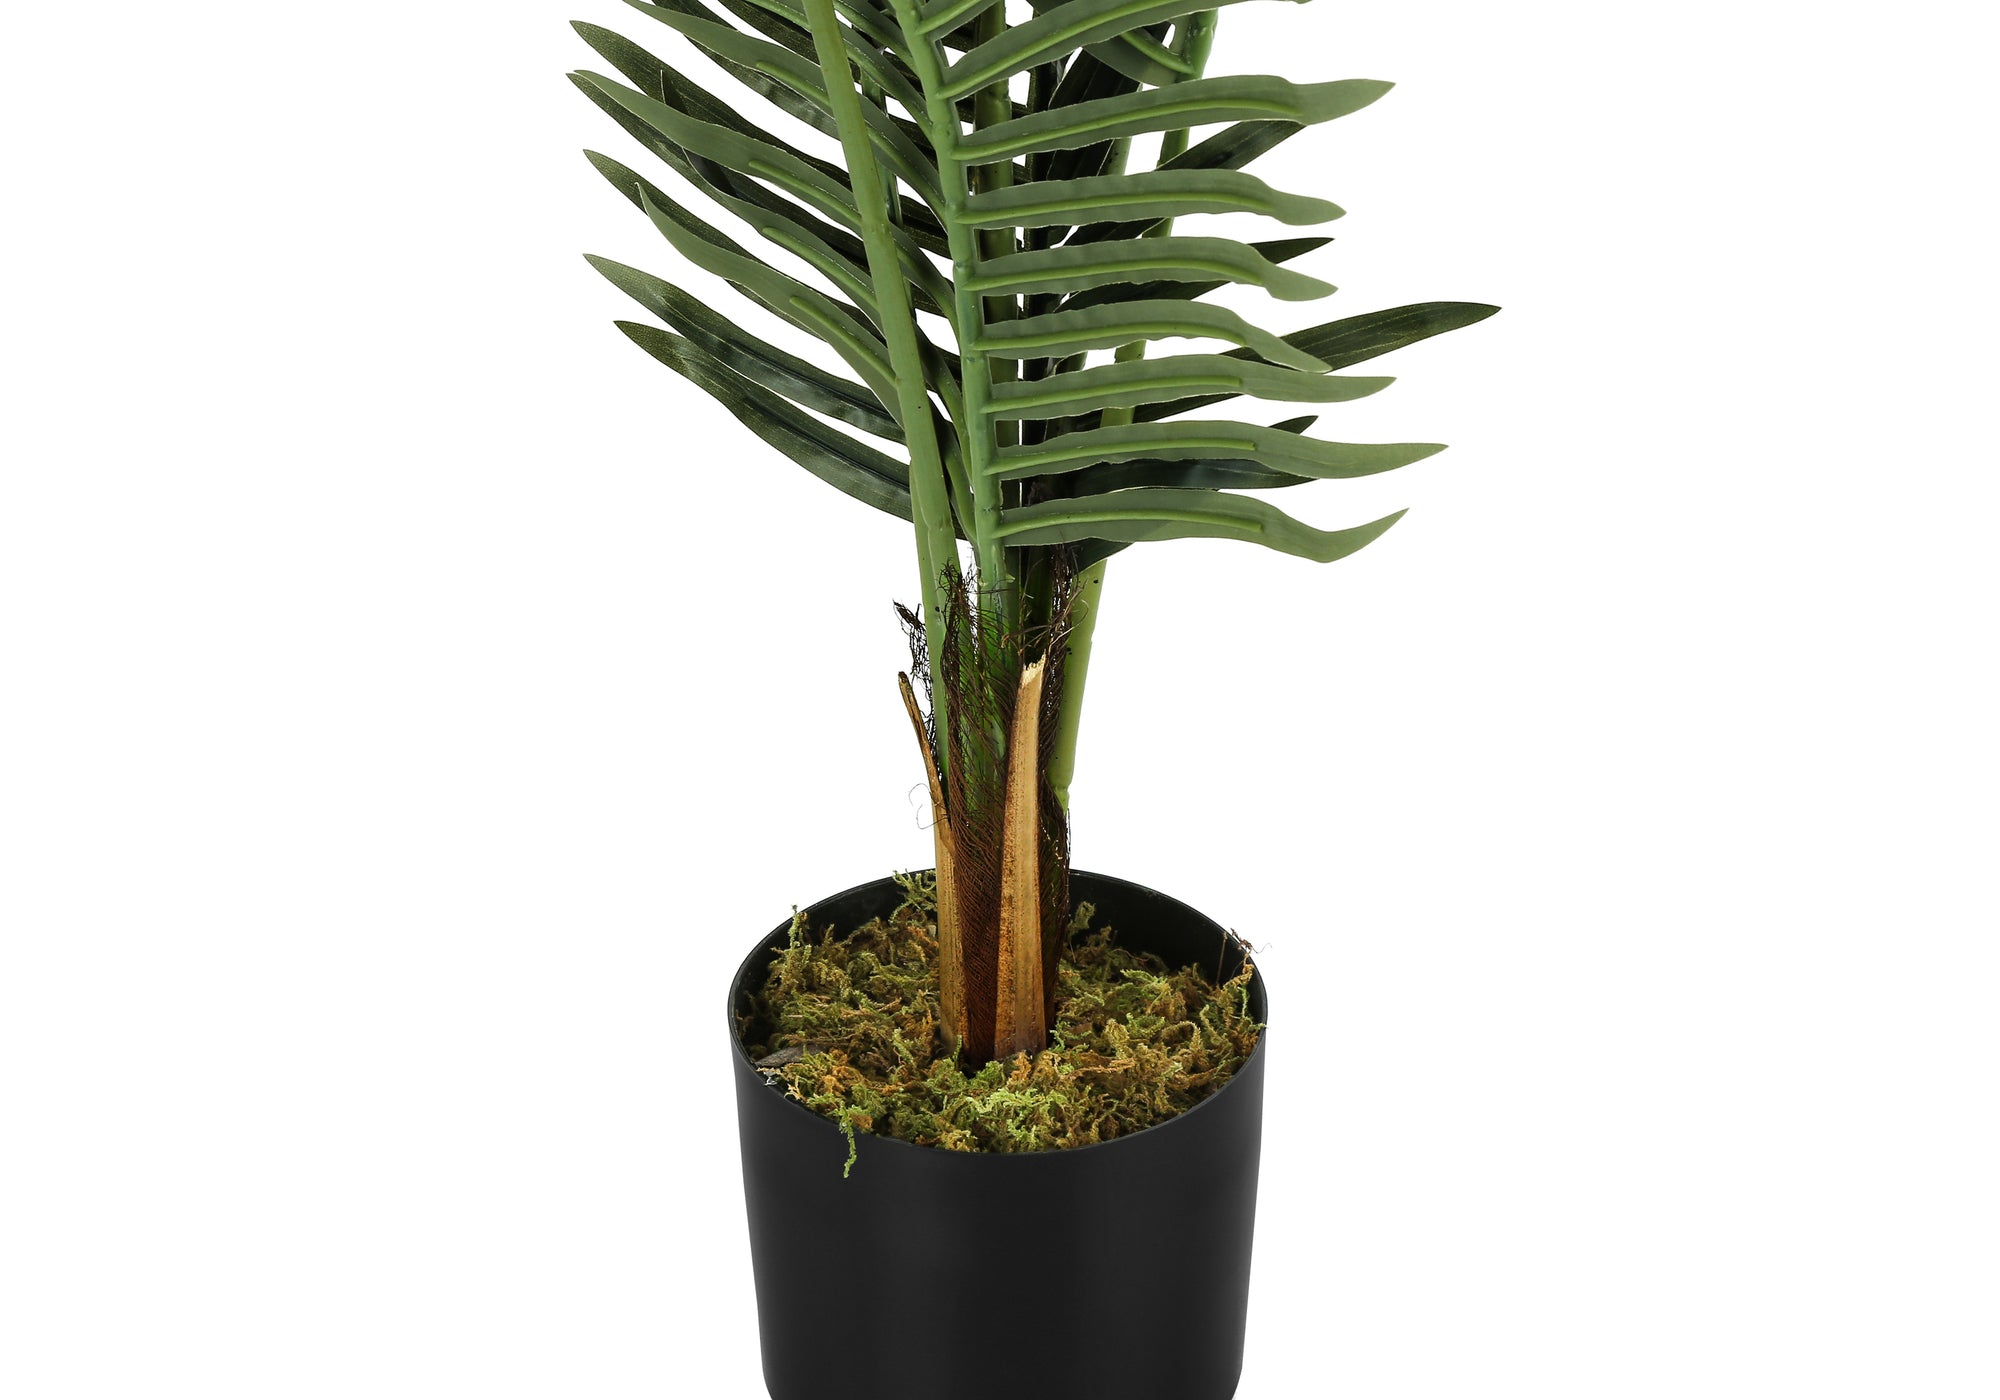 MN-439537    Artificial Plant, 47" Tall, Palm Tree, Indoor, Faux, Fake, Floor, Greenery, Potted, Real Touch, Decorative, Green Leaves, Black Pot